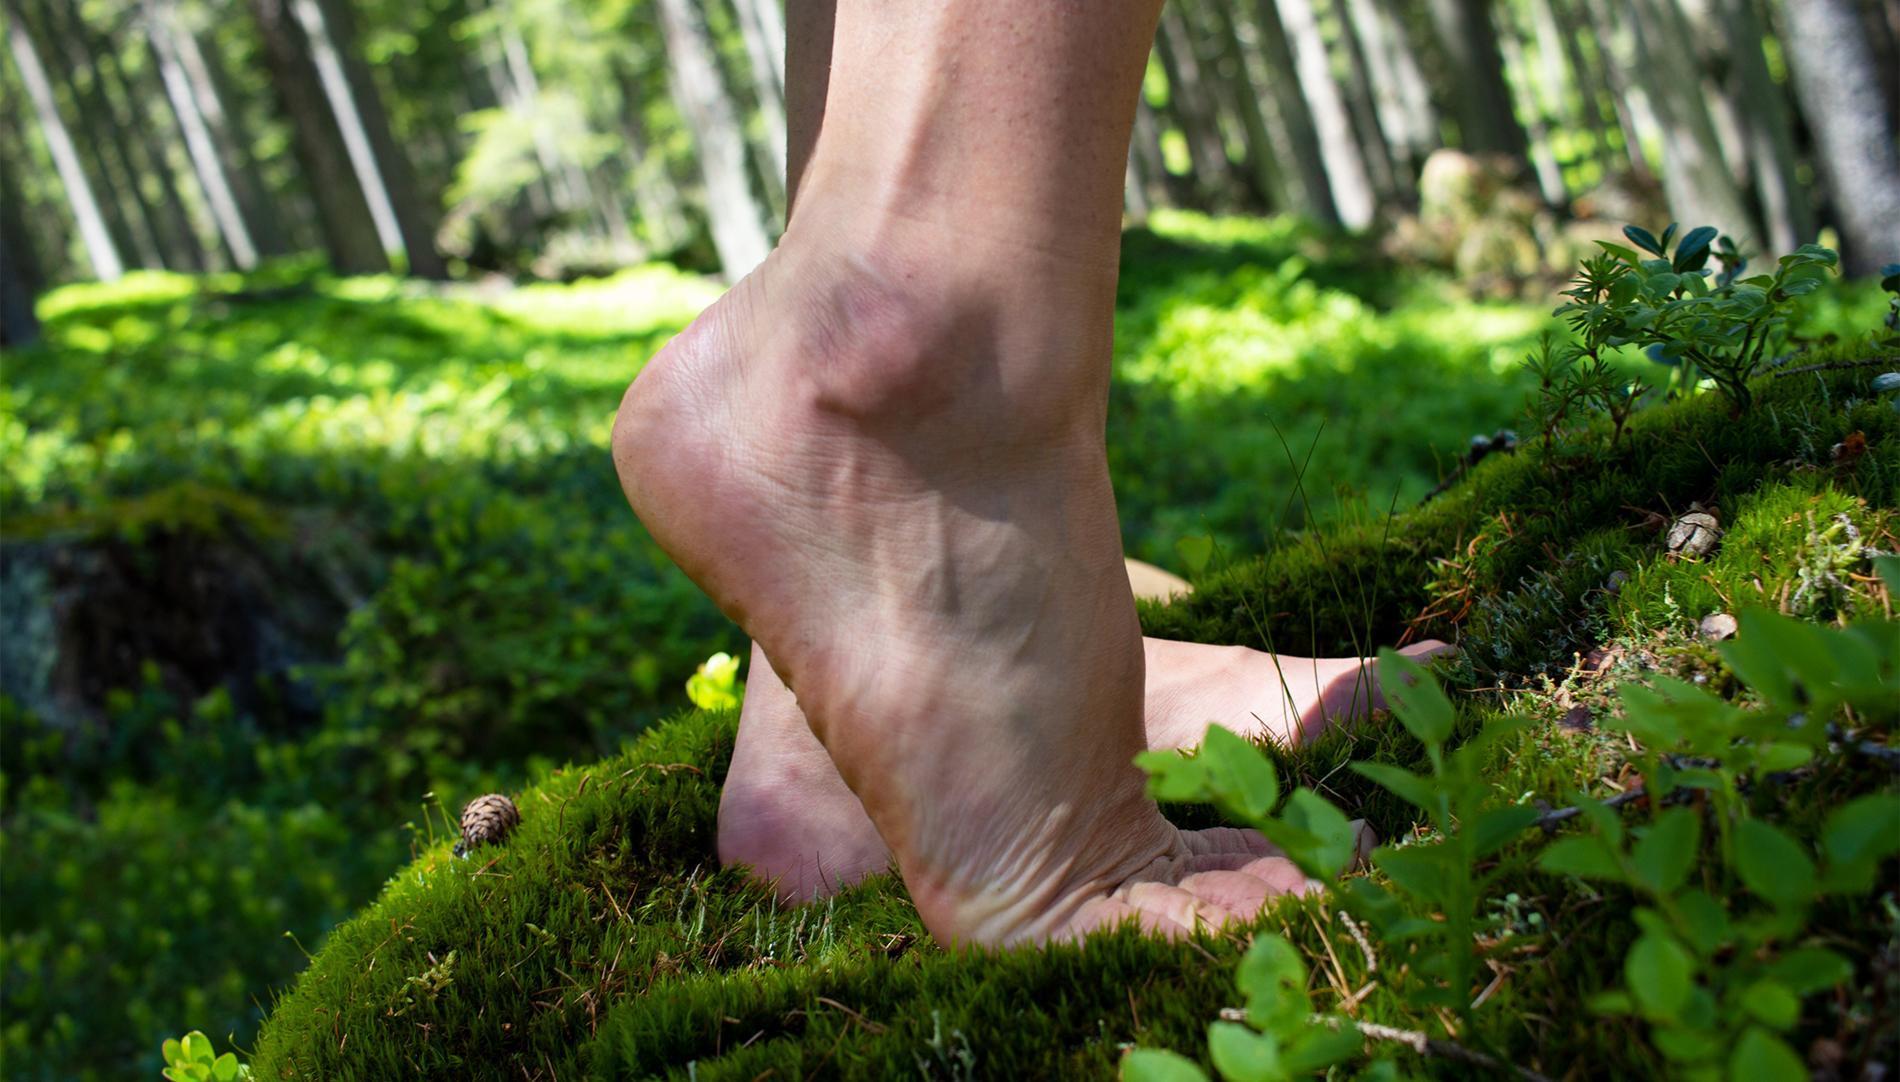 Barefoot in the forest